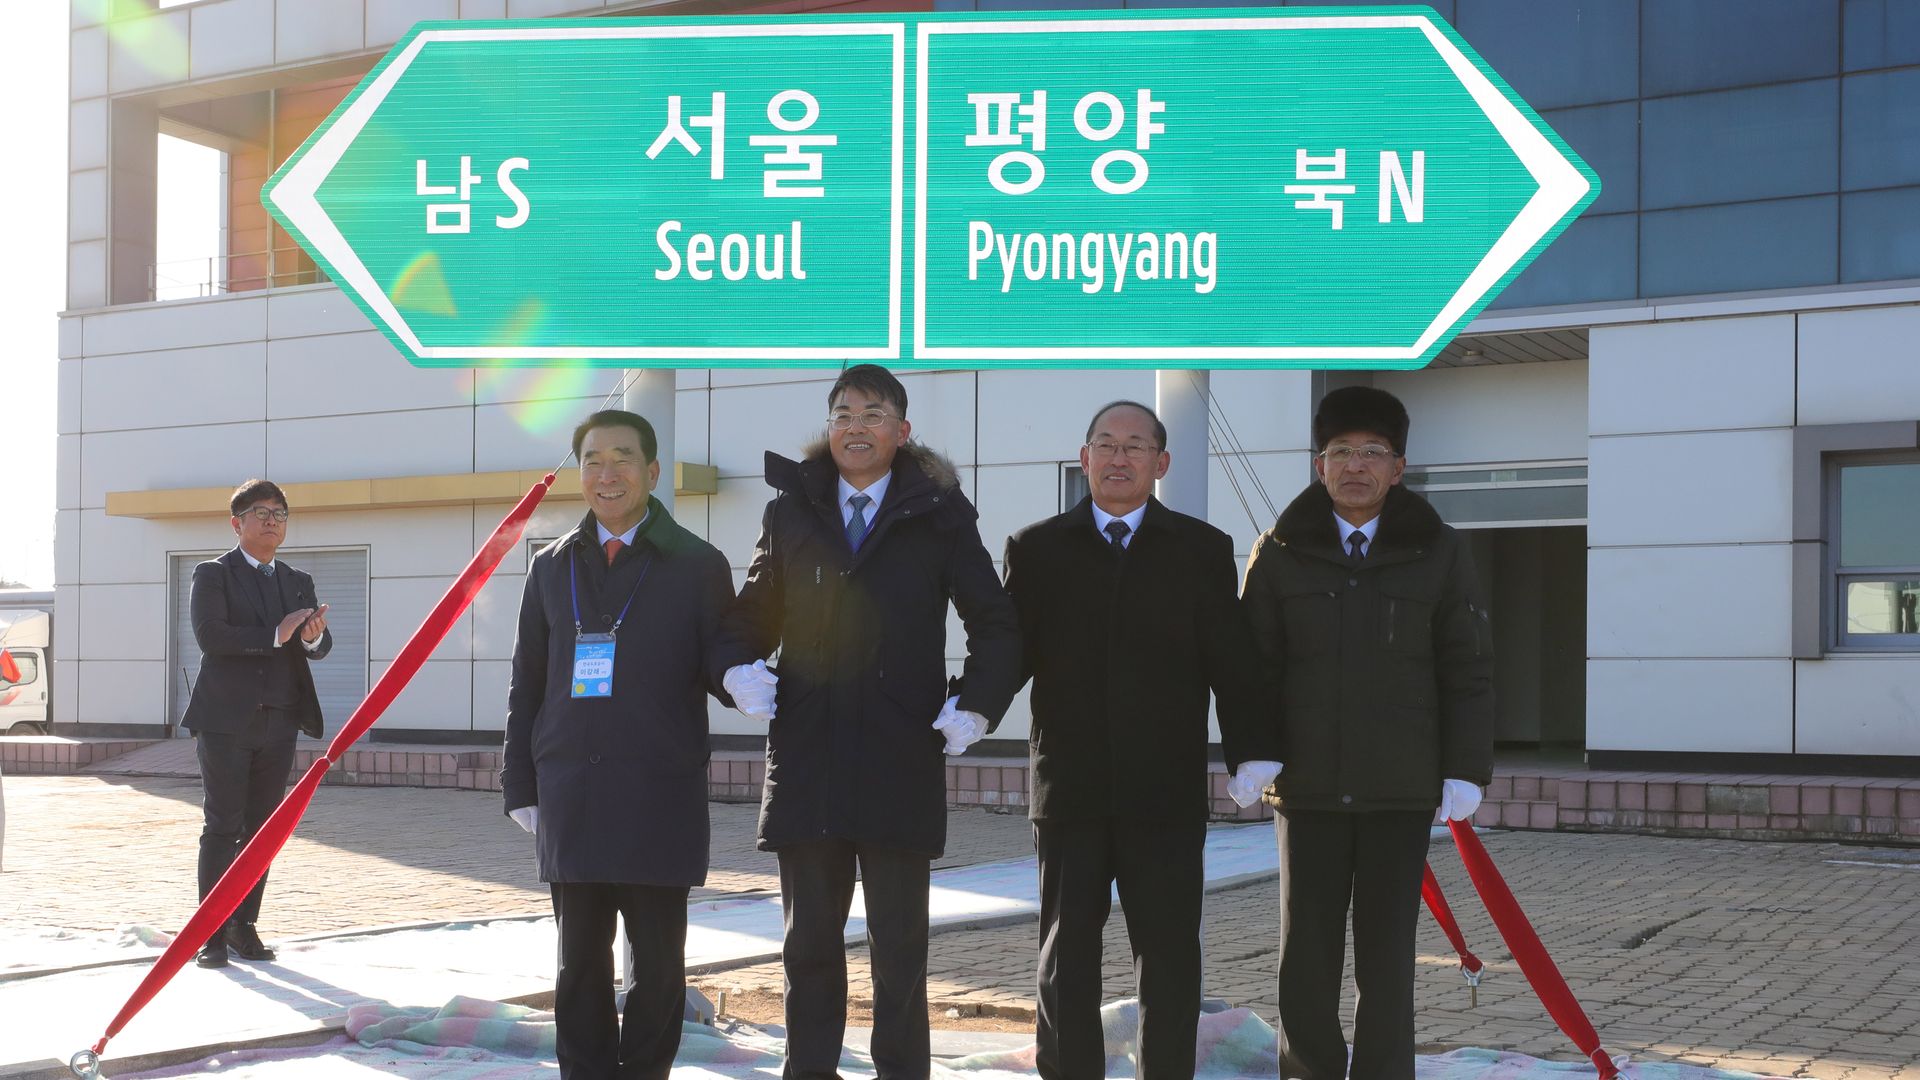 Officials from South and North Korea stand in front of a road sign in Kaesong, North Korea.